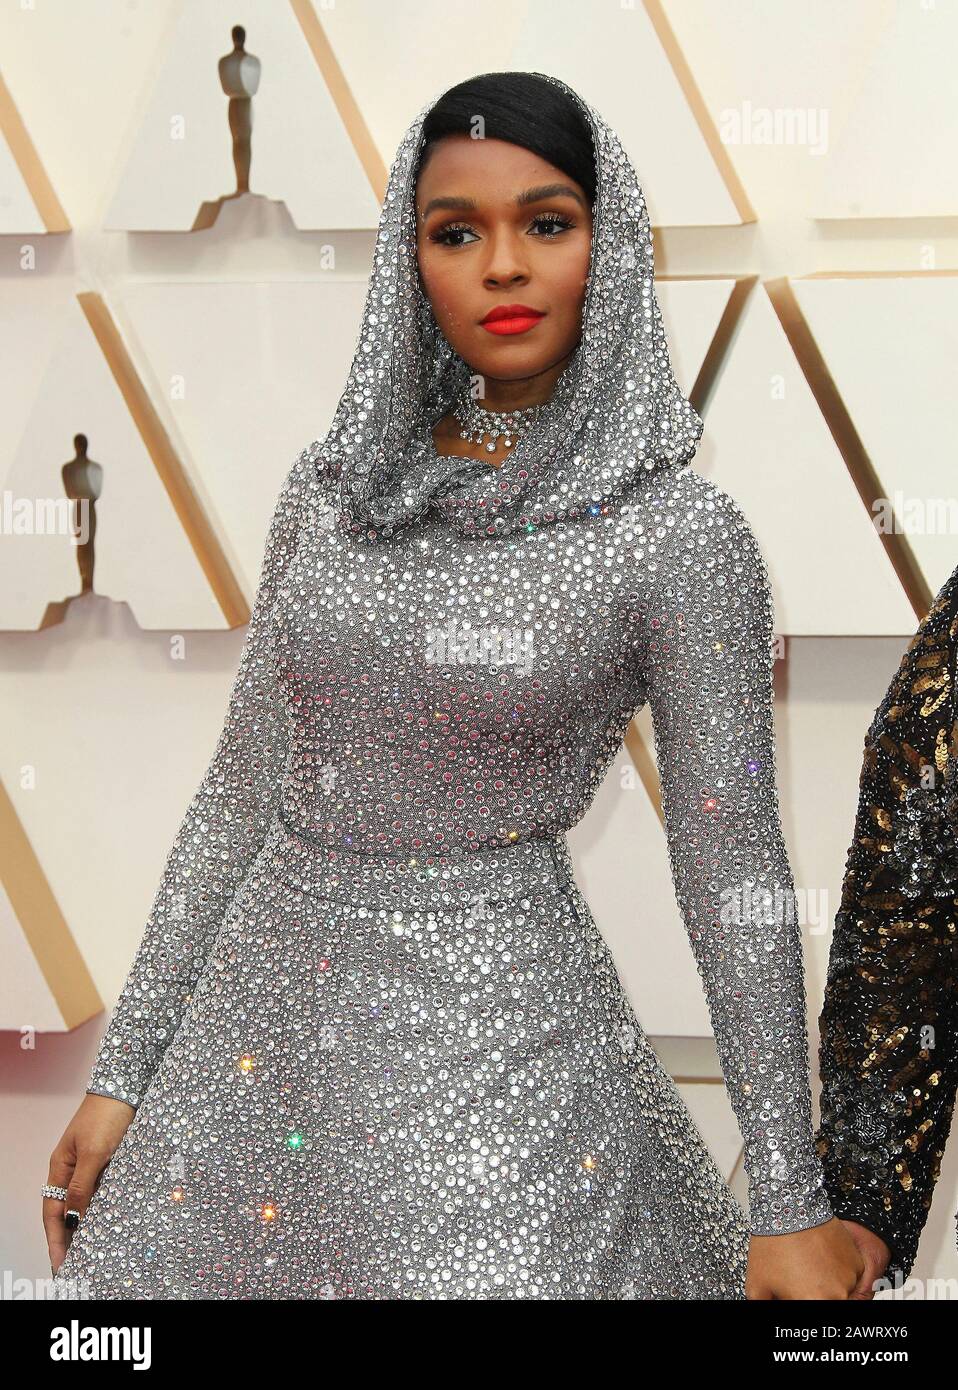 Hooded Gowns Are Trending on the Red Carpet